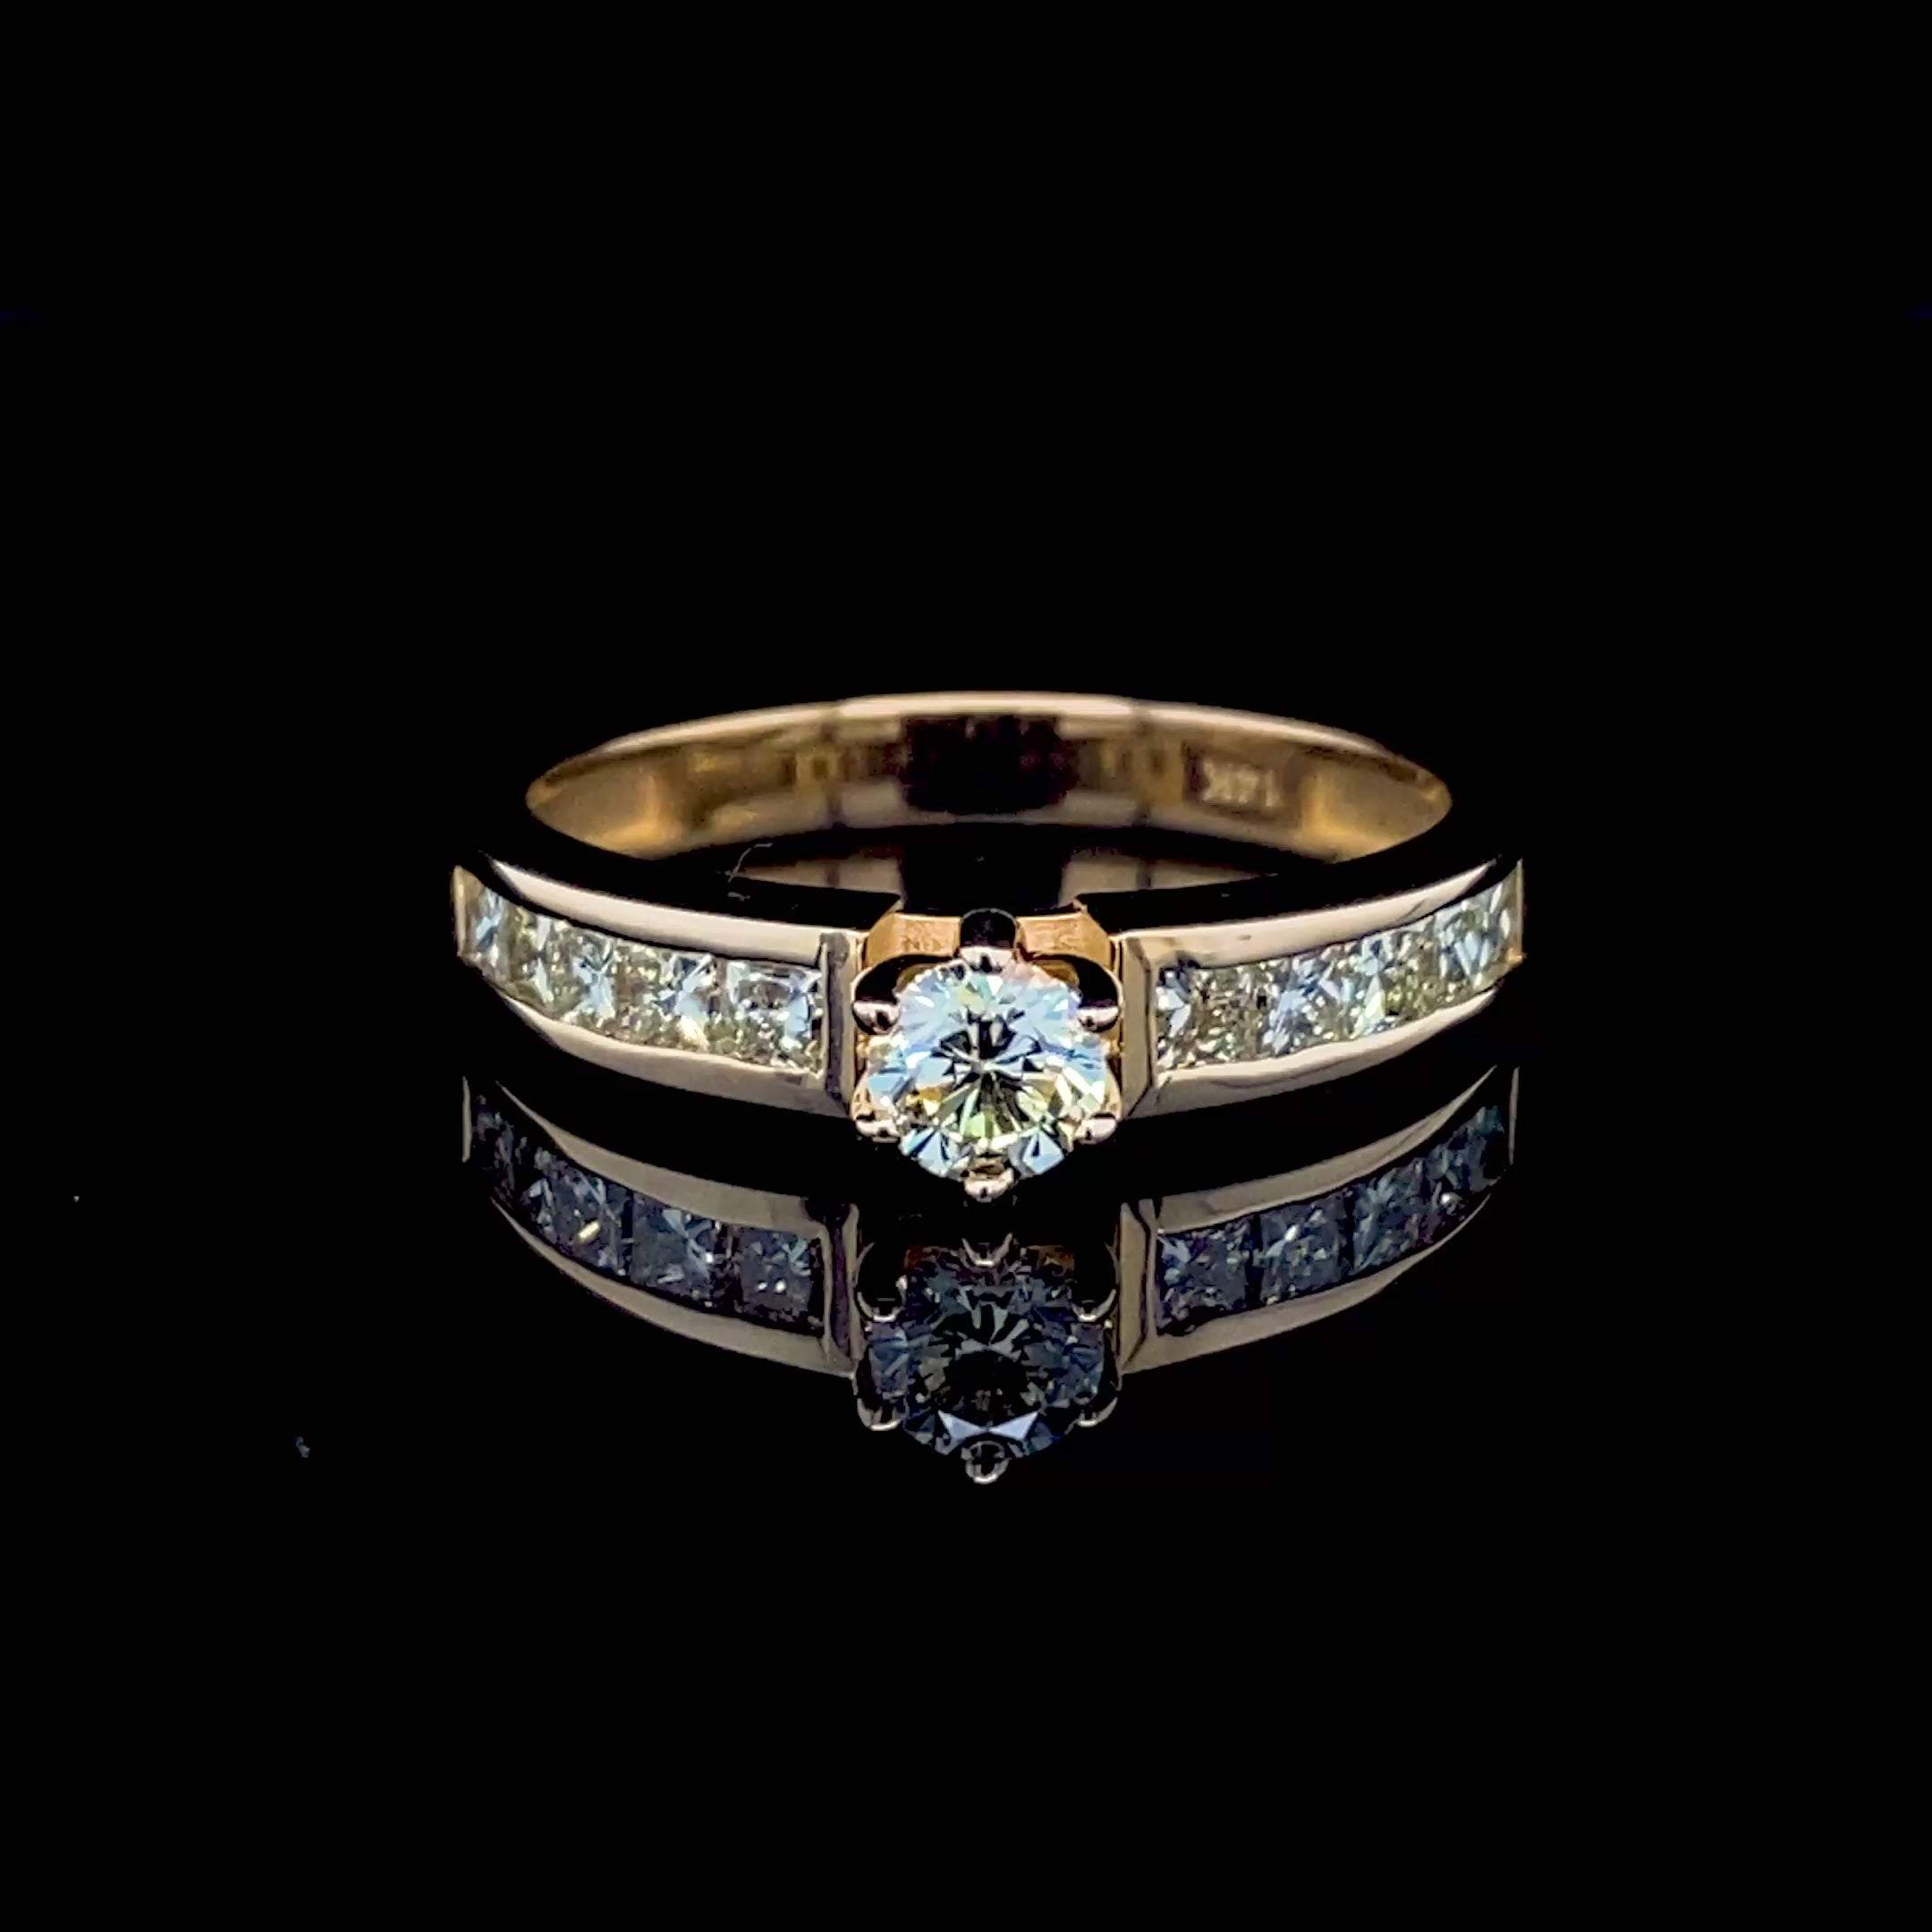 Premium 1.35CT Round and Princess Cut Diamond Engagement Ring in 14kt Yellow Gold